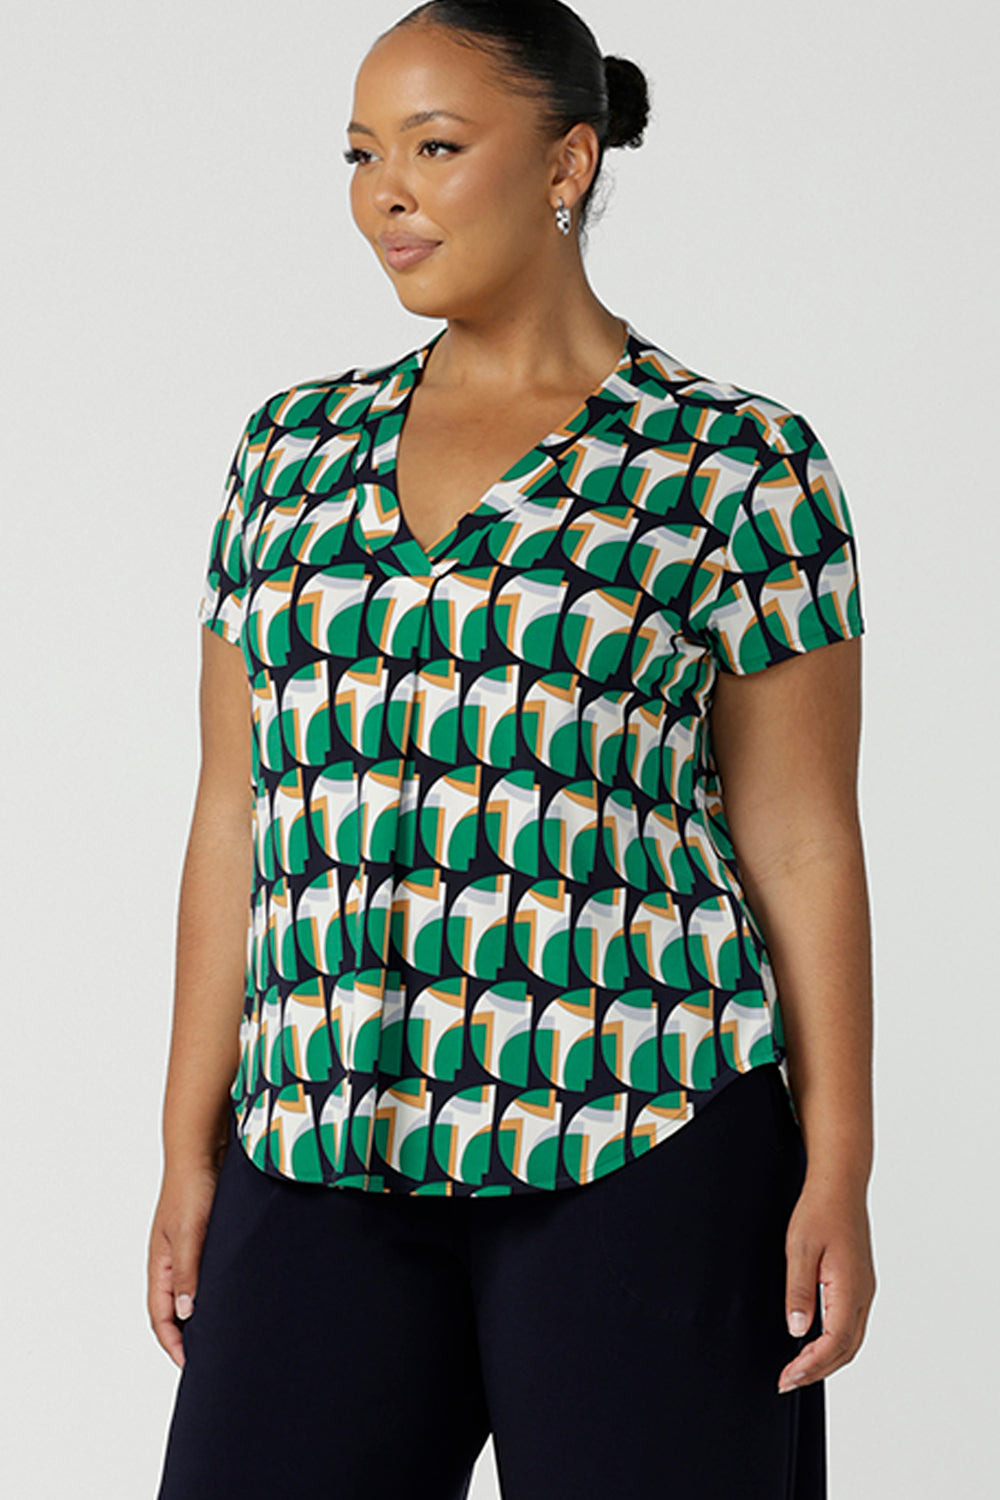 A curvy size 18 woman wears a v-neck short sleeve jersey top in a geometric print. She wears the top. Designed and made in Australia for petite to plus size women.